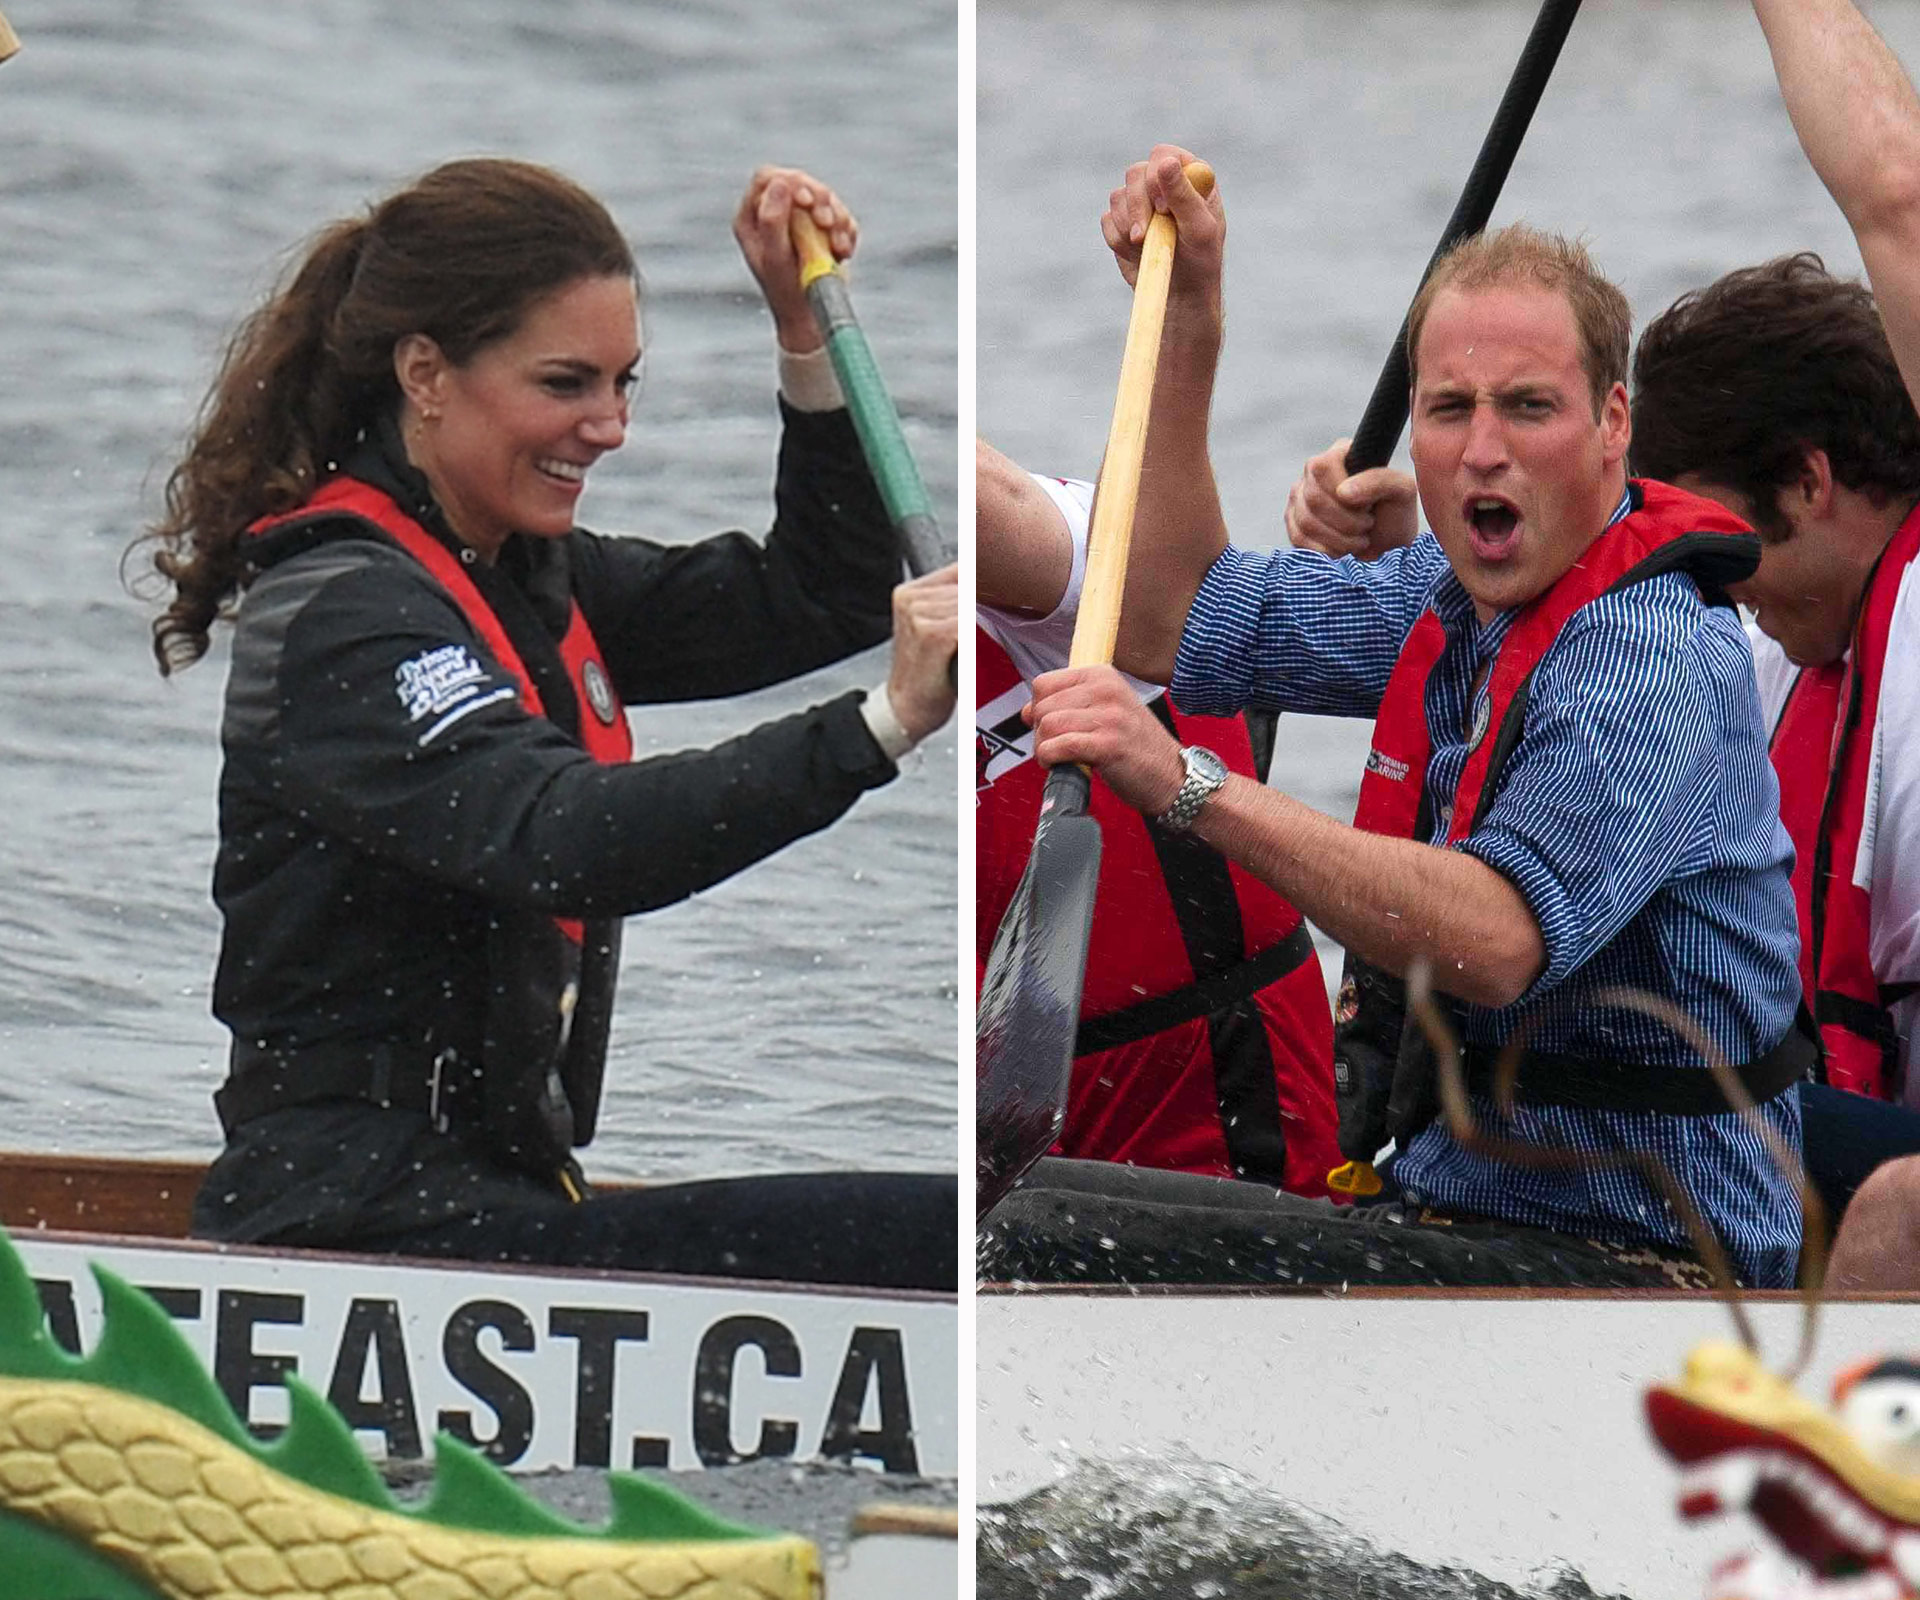 Wills and Kate boat race